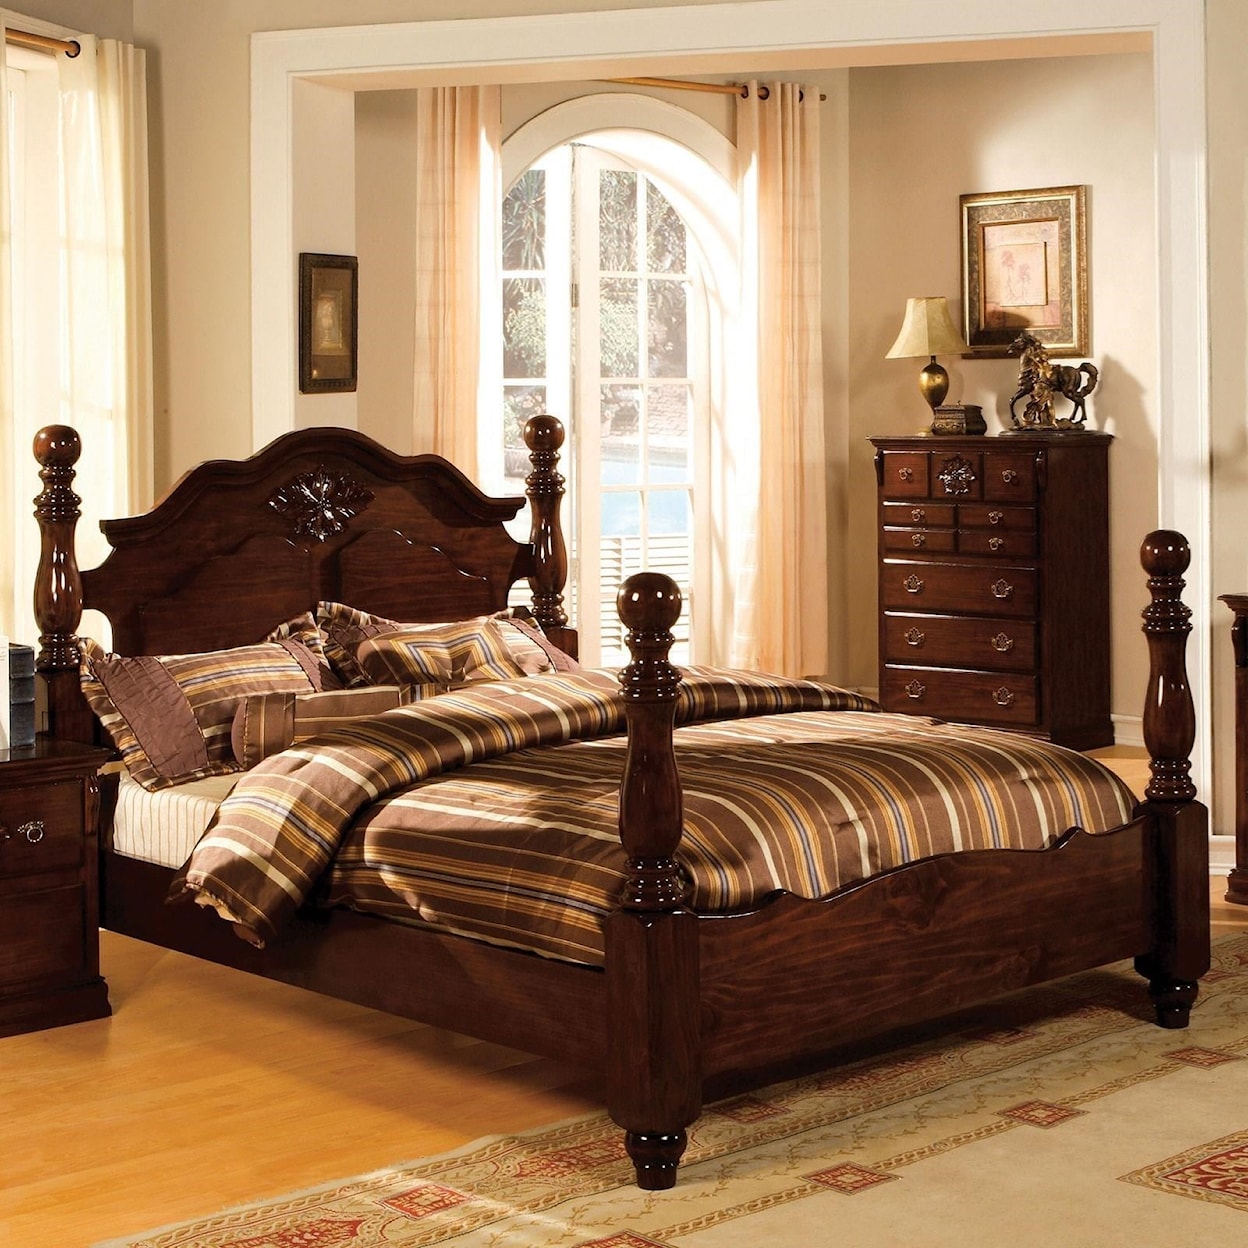 FUSA Tuscan Queen Bed